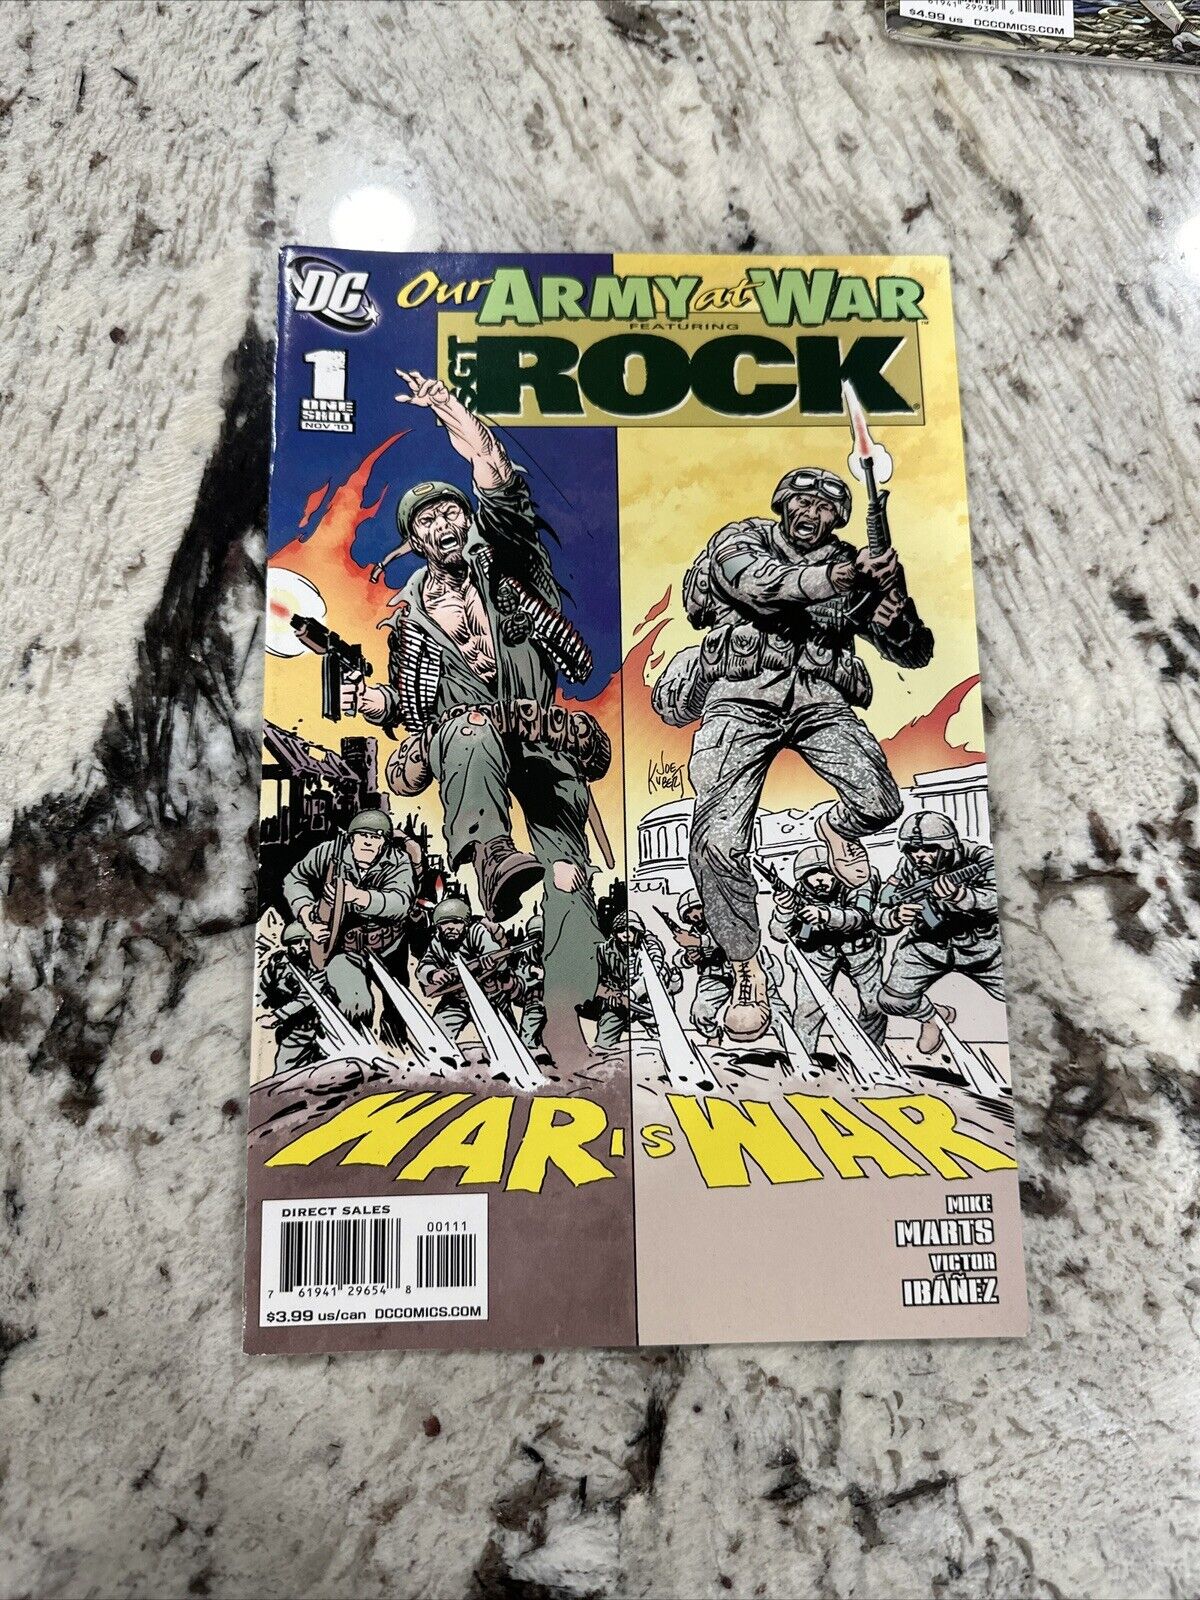 Our Army At War Featuring Sgt Rock #1 Comic DC 2010 Joe Kubert Cover Ibanez RARE